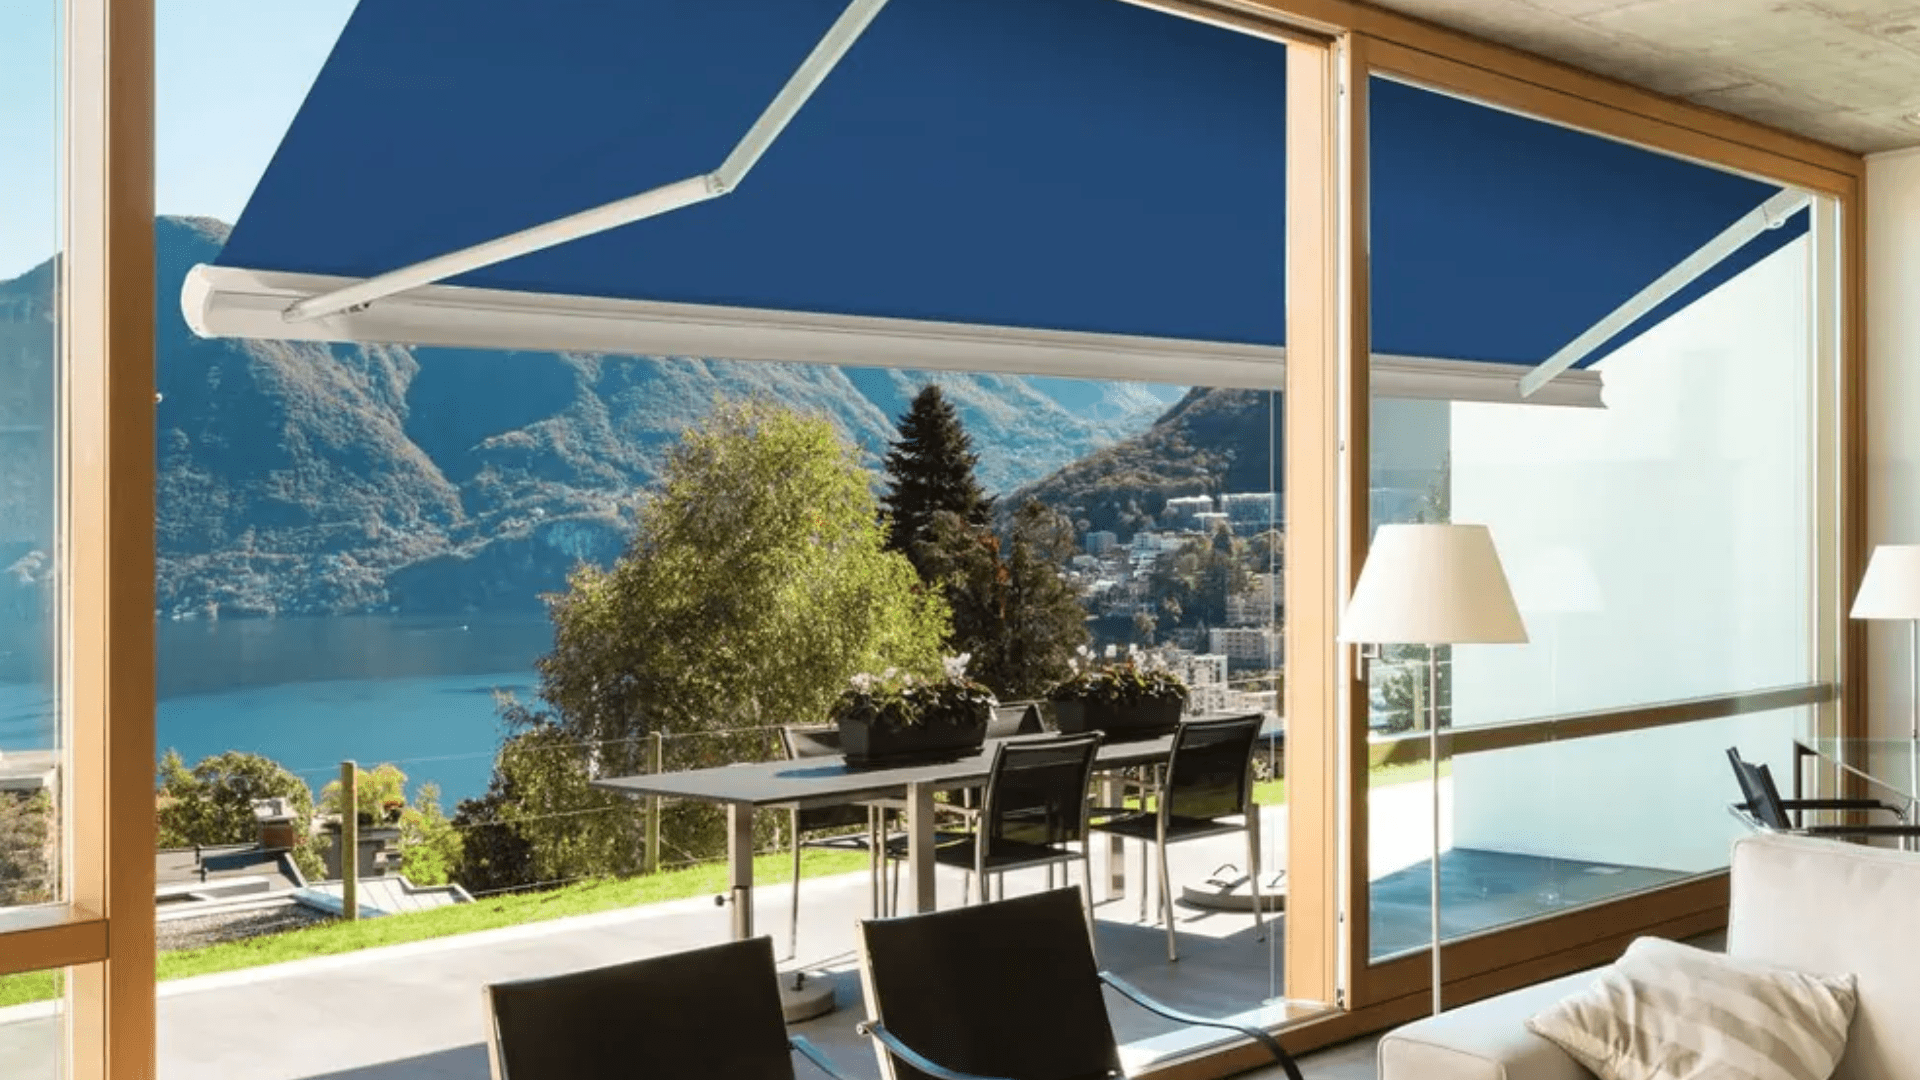 7 Things to Consider Before Buying a Retractable Awning